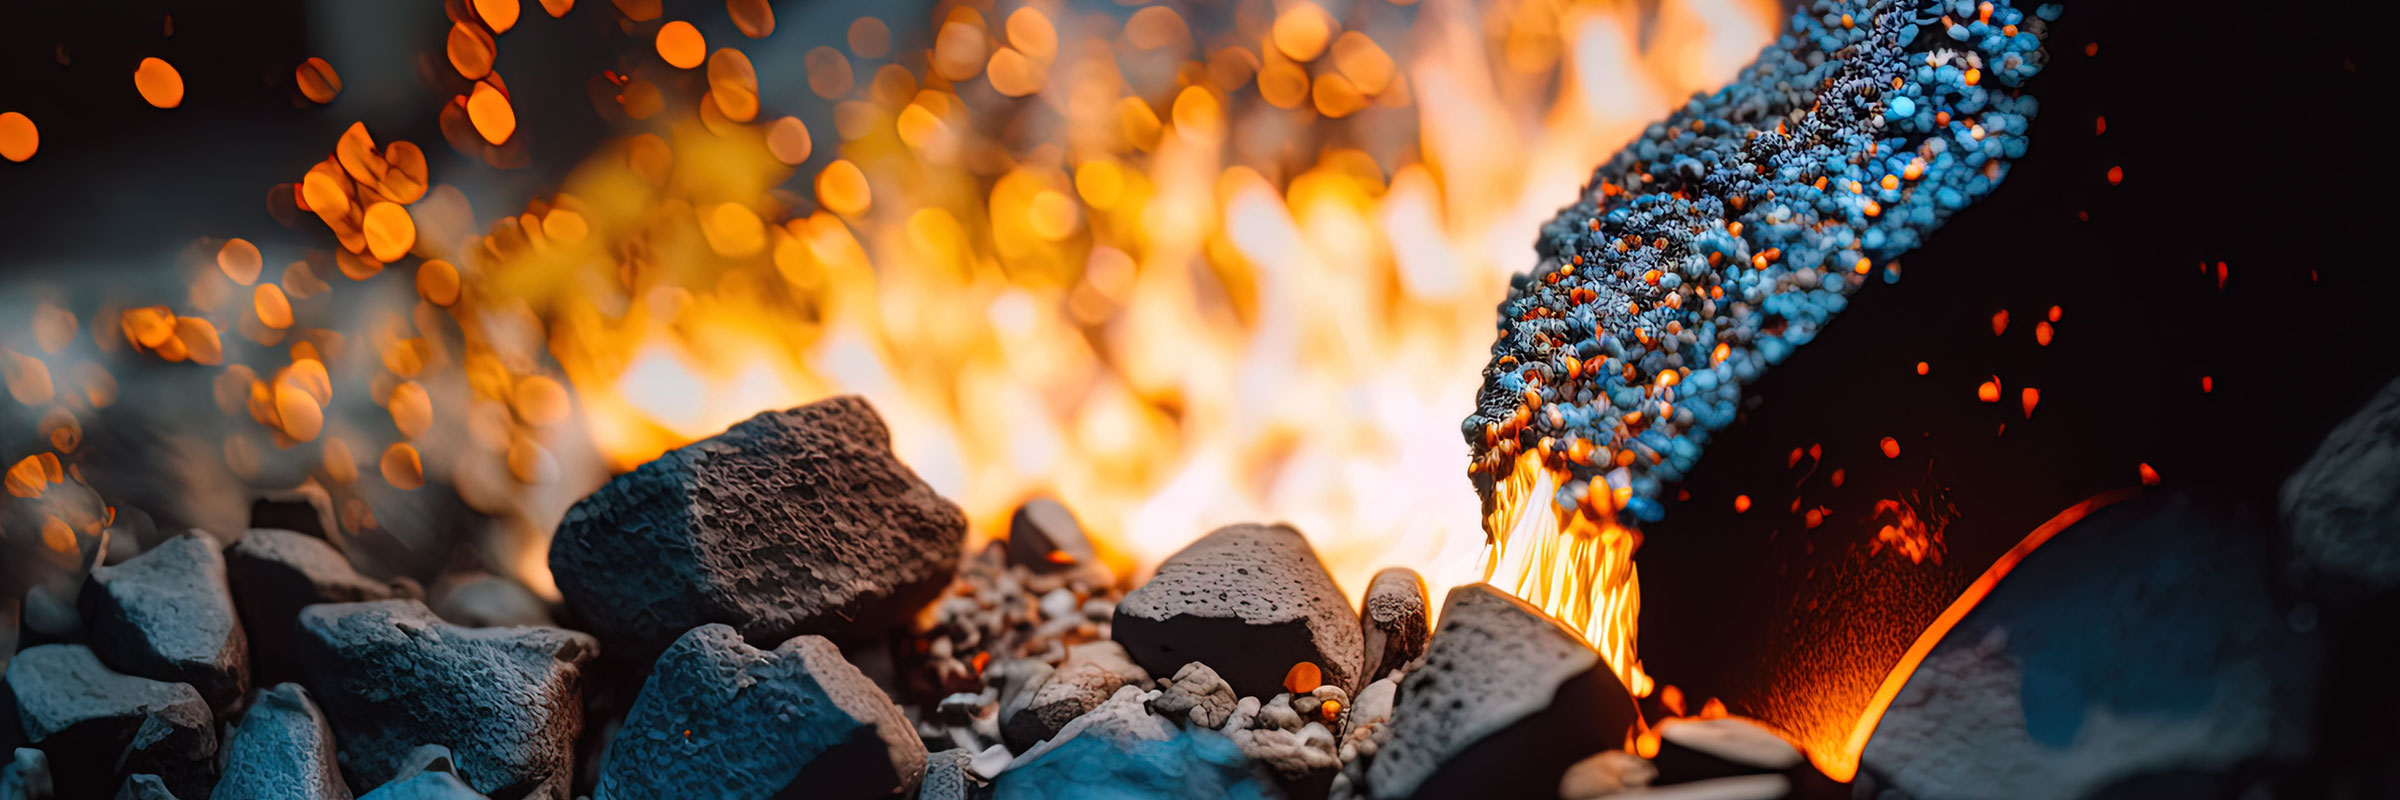 Charcoal coals sitting in a flame